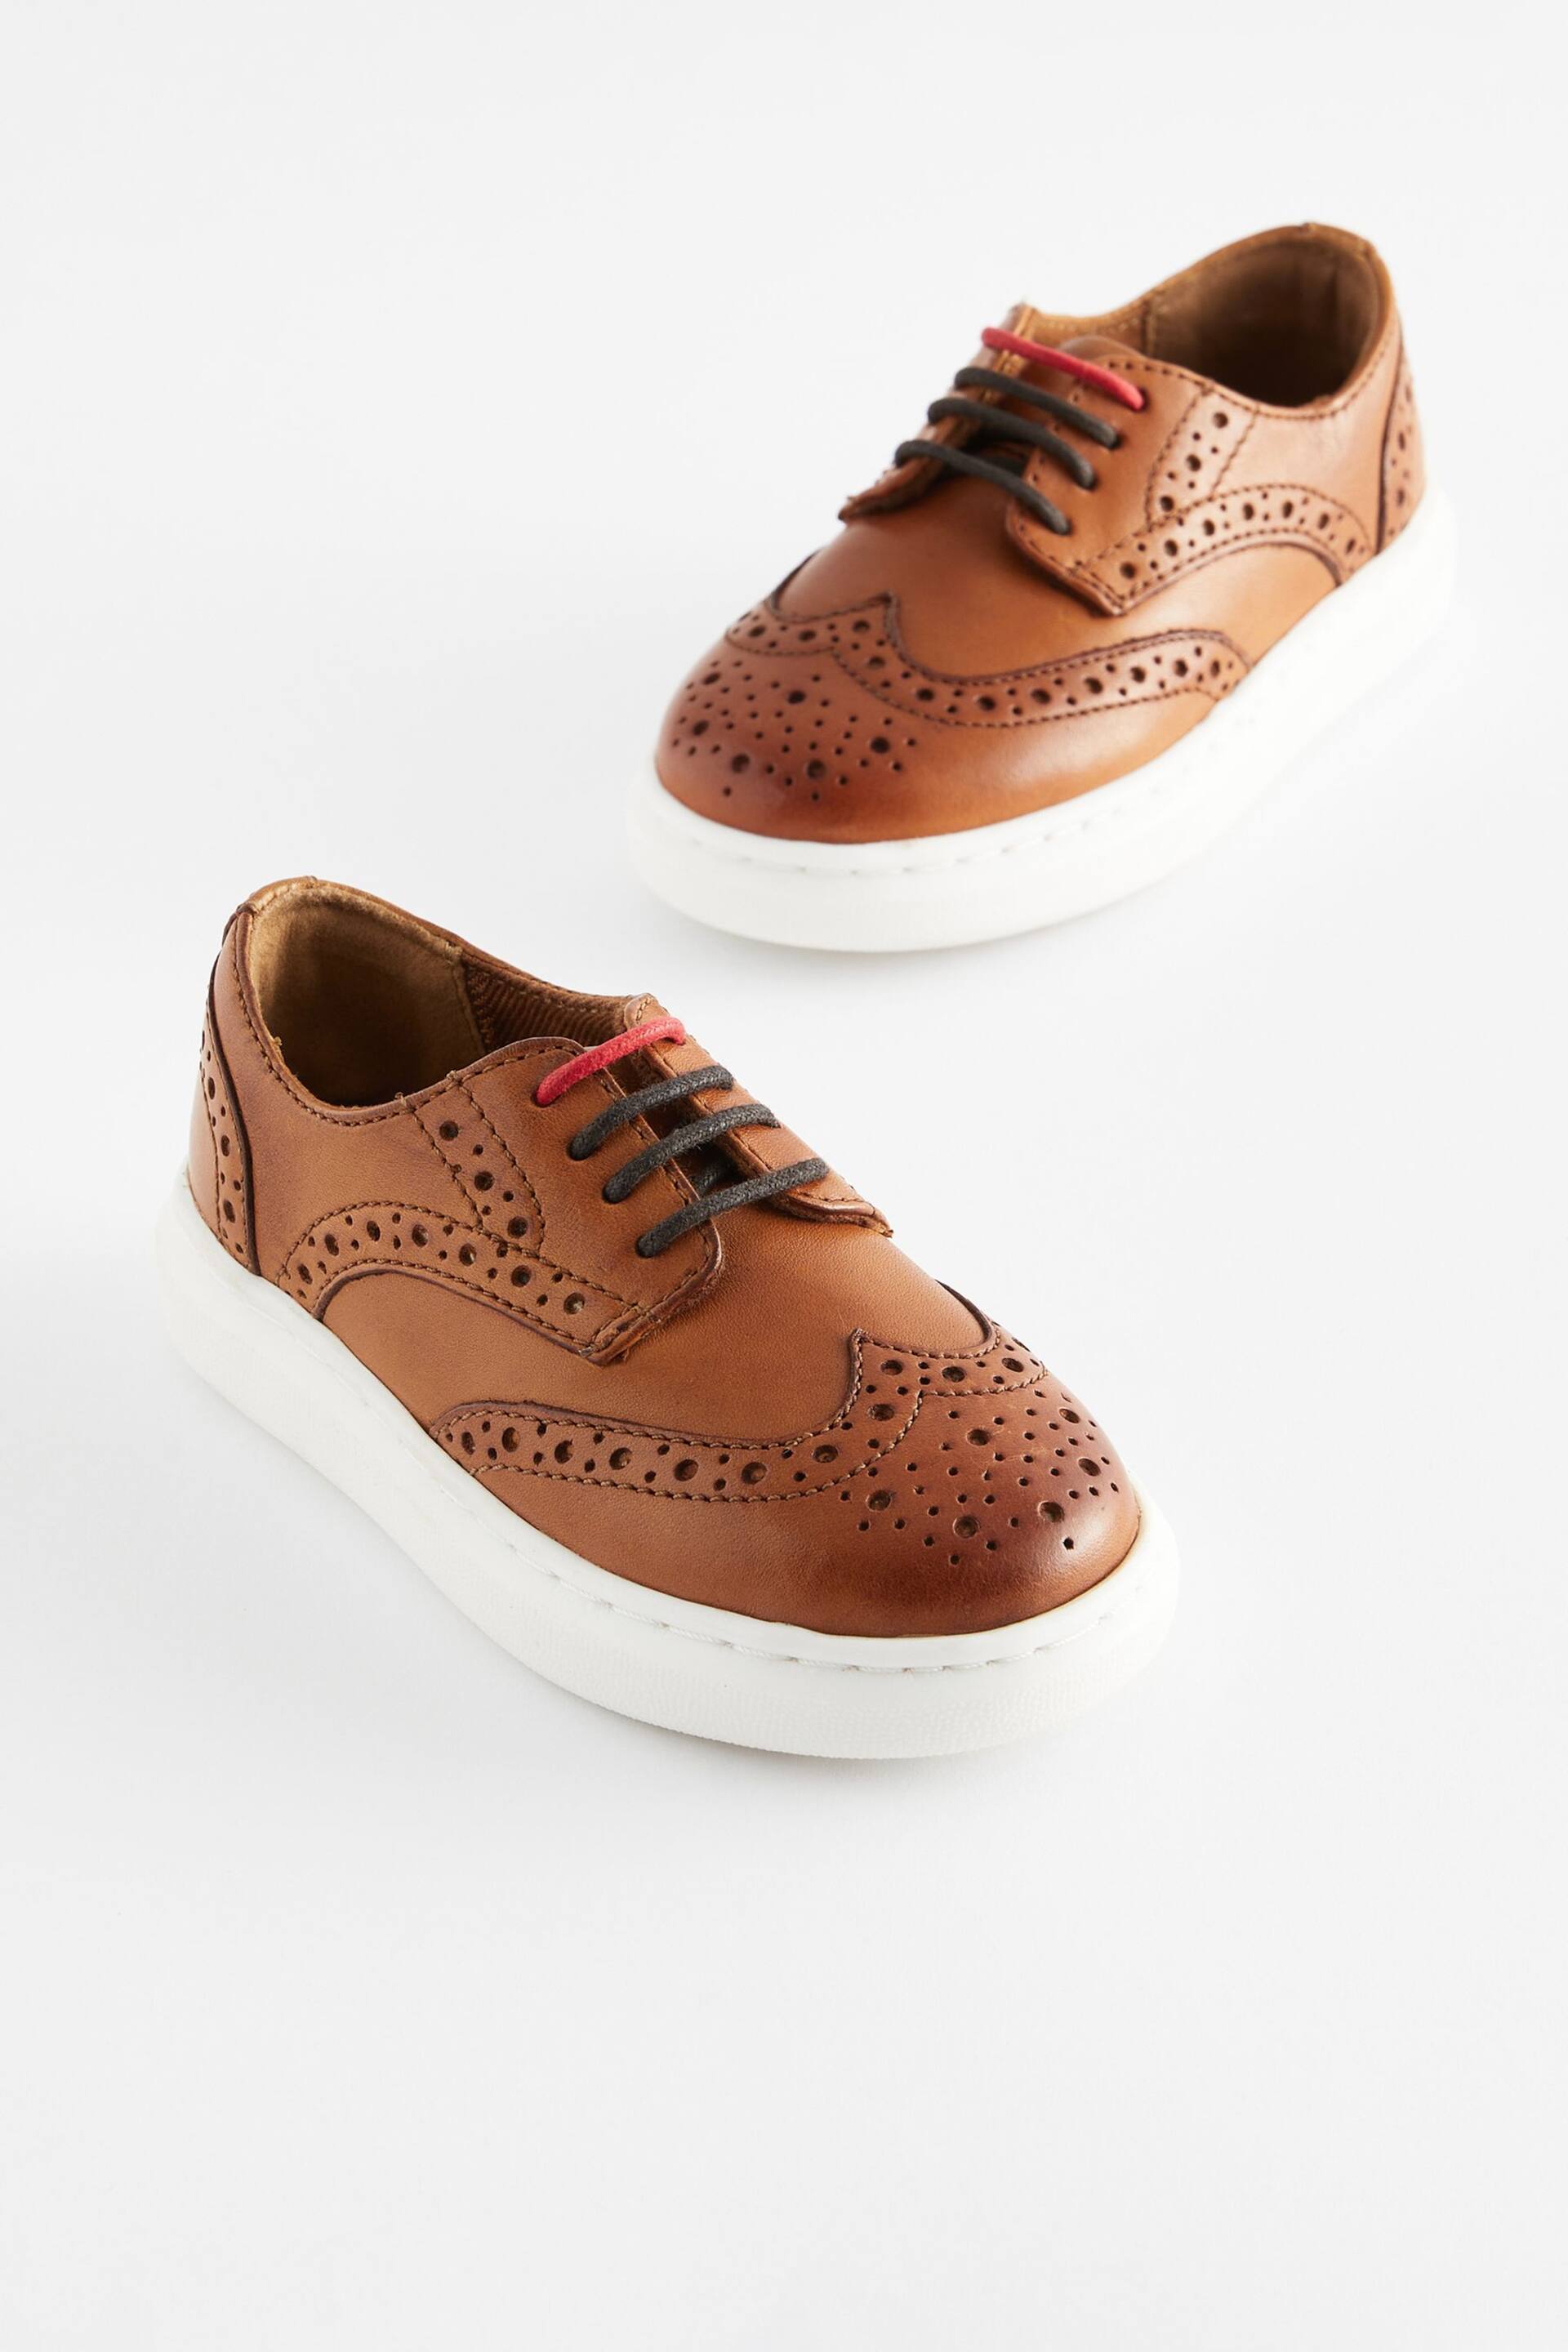 Tan Brown Brogue Smart Leather Lace-Up Shoes - Image 5 of 9